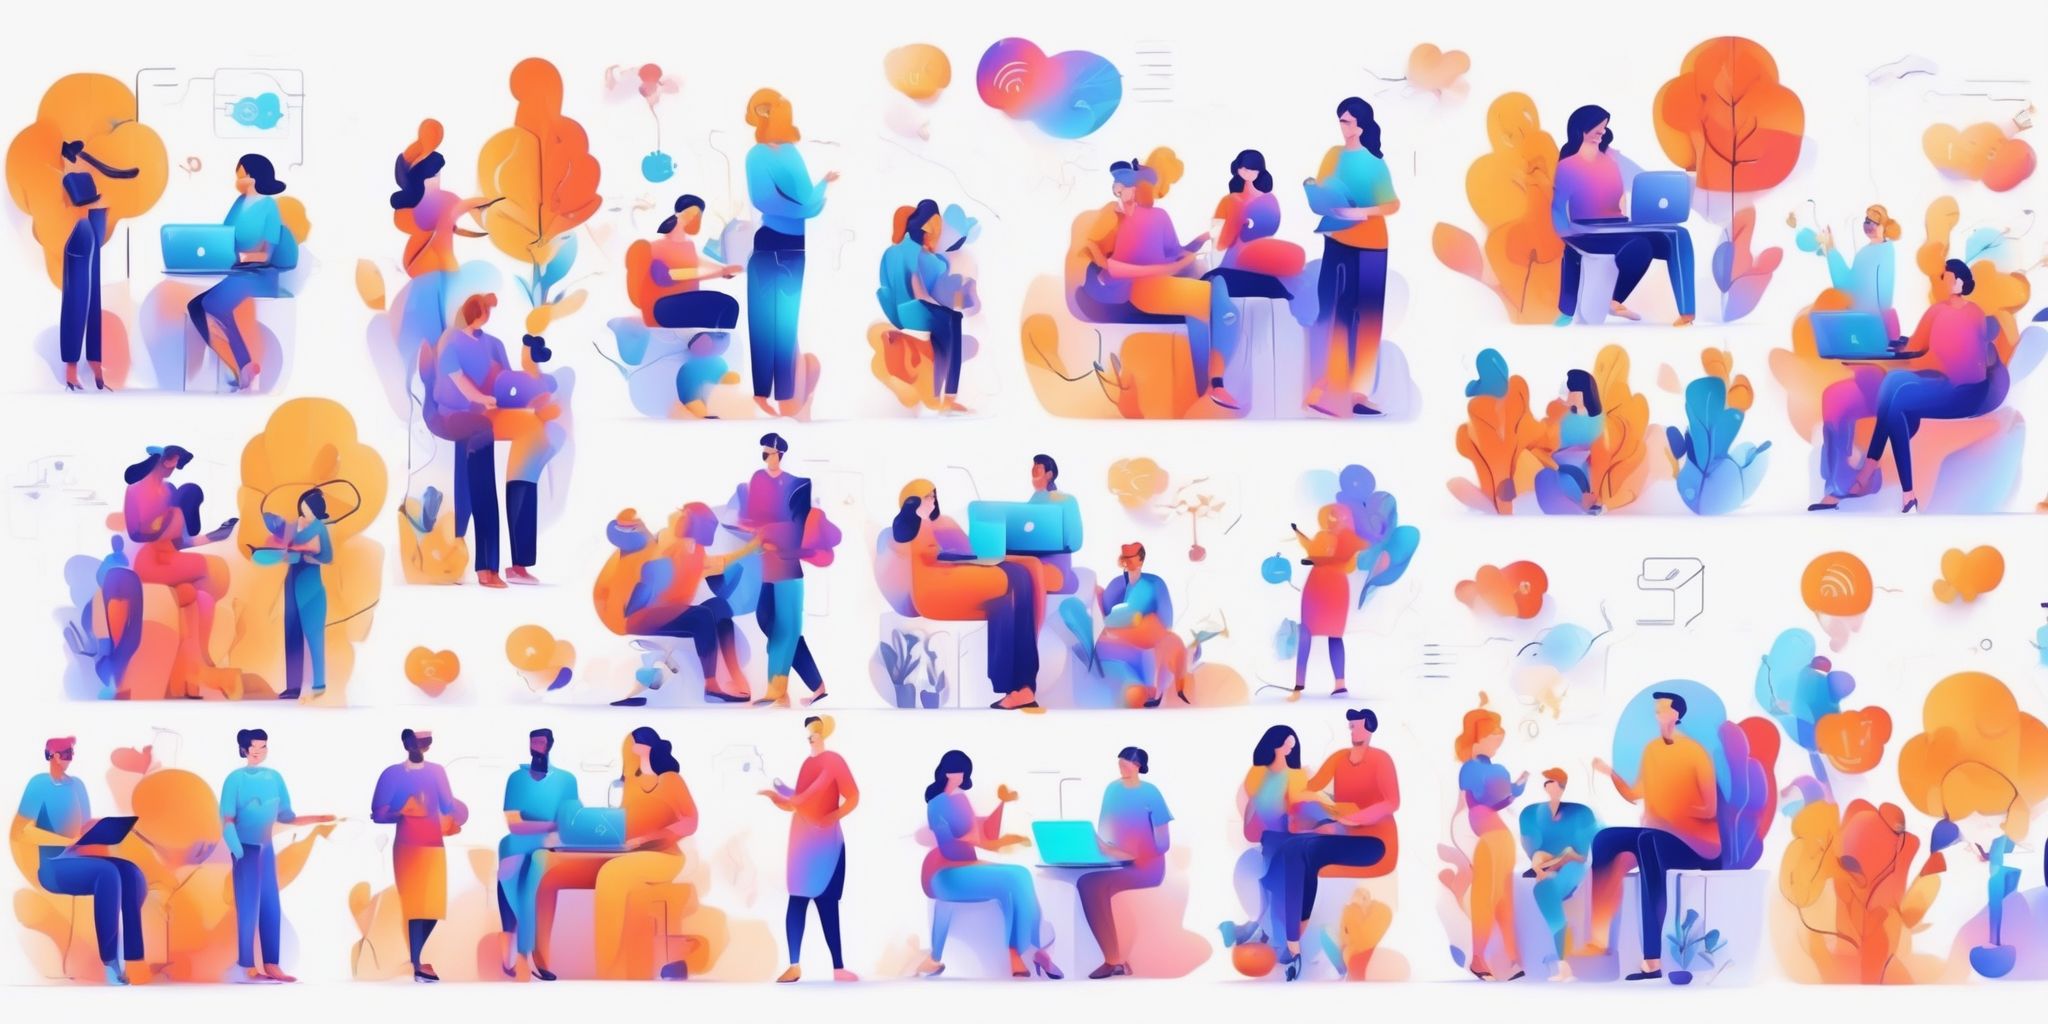 Online community in illustration style with gradients and white background